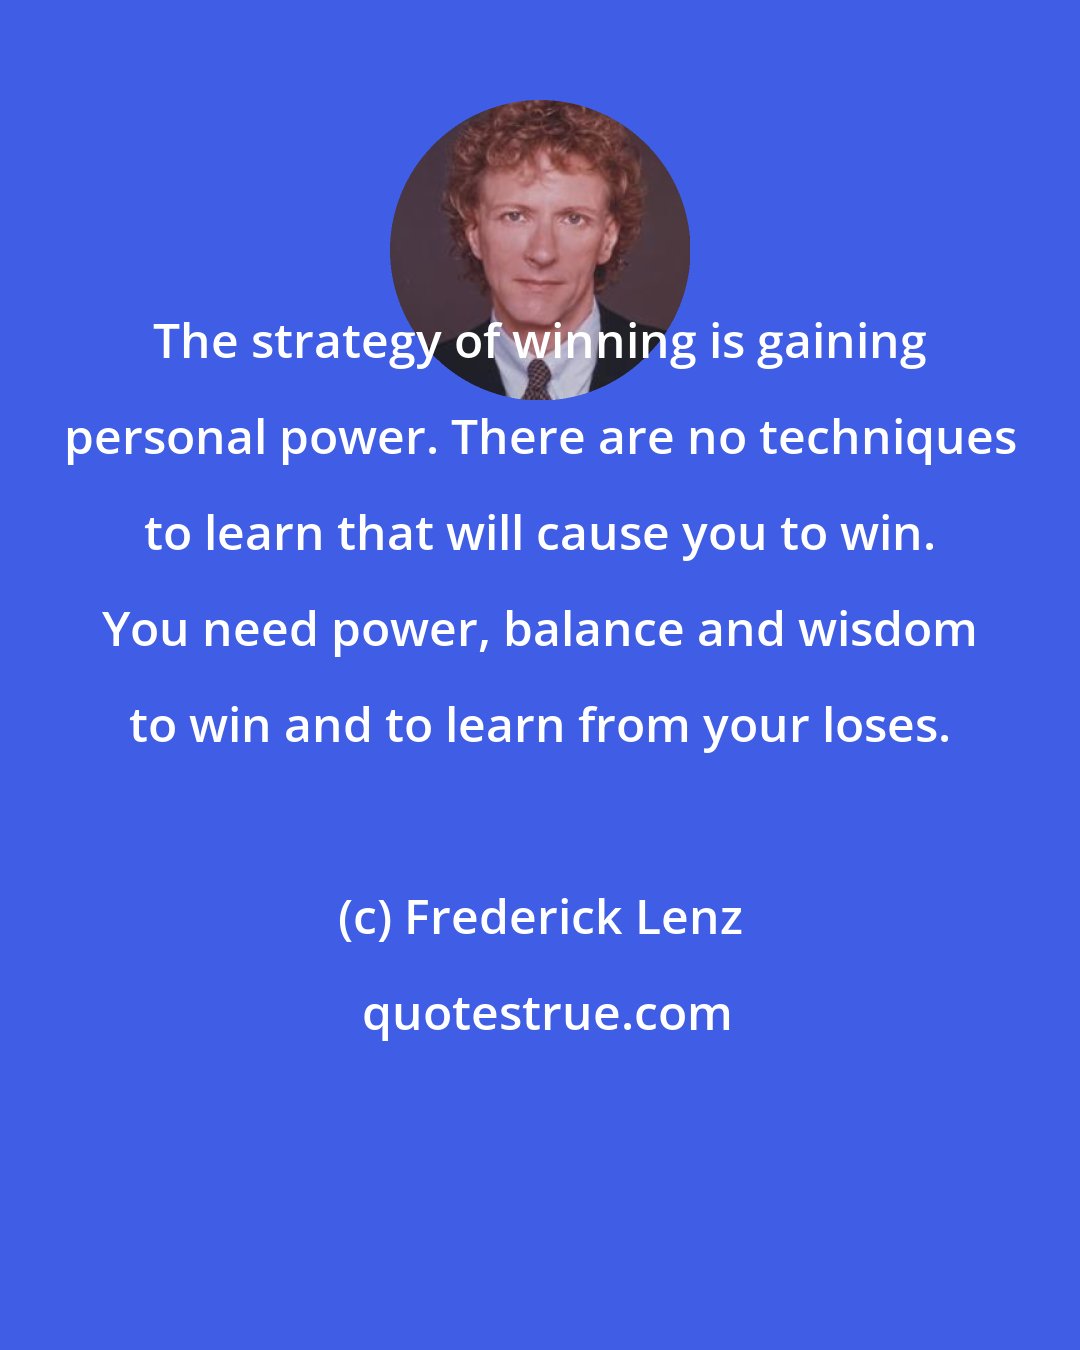 Frederick Lenz: The strategy of winning is gaining personal power. There are no techniques to learn that will cause you to win. You need power, balance and wisdom to win and to learn from your loses.